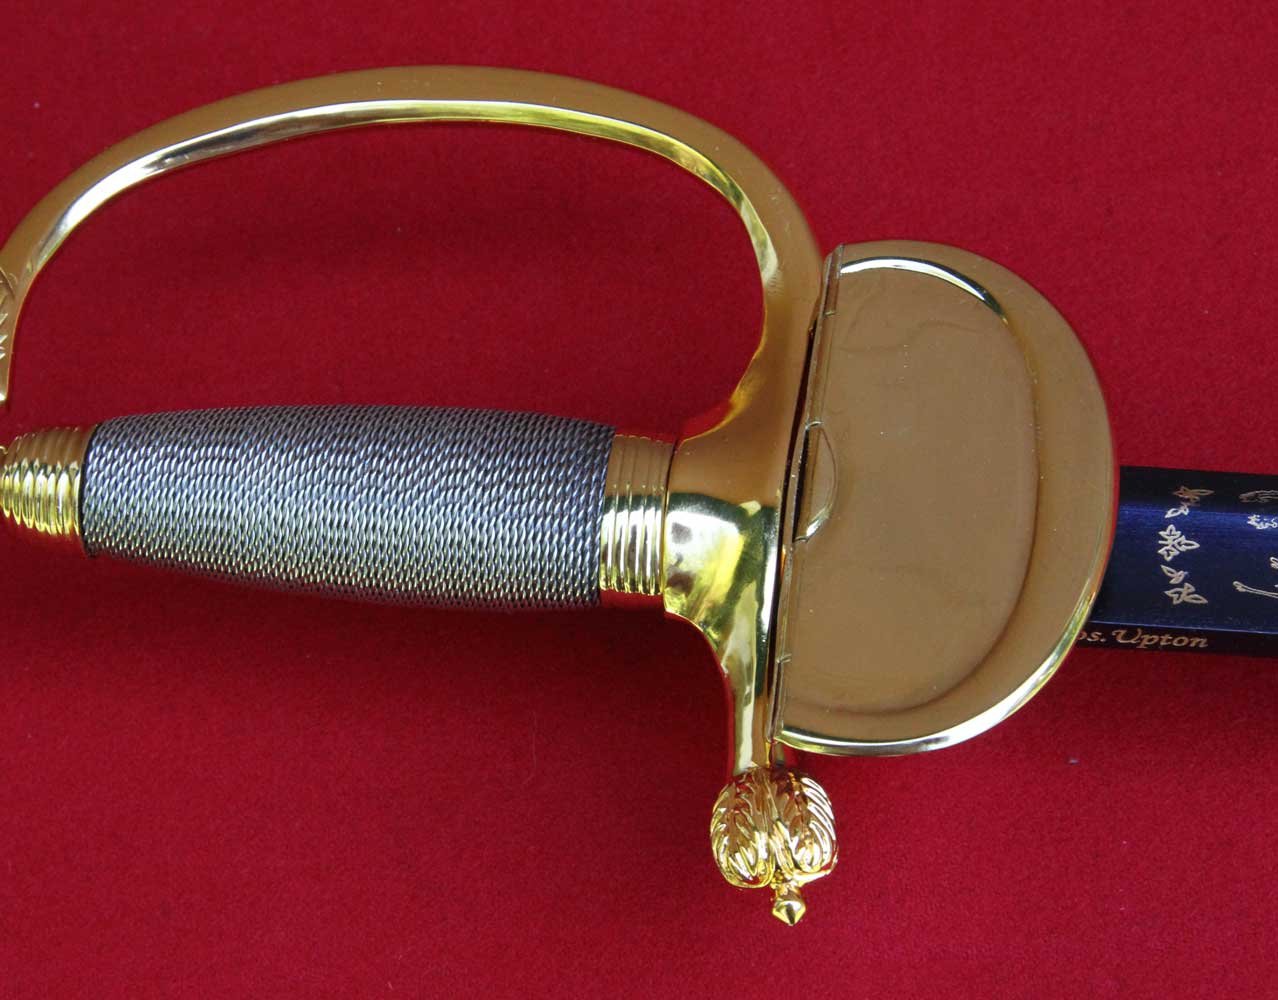 British, 1796 Infantry Officer's Sword - Click Image to Close